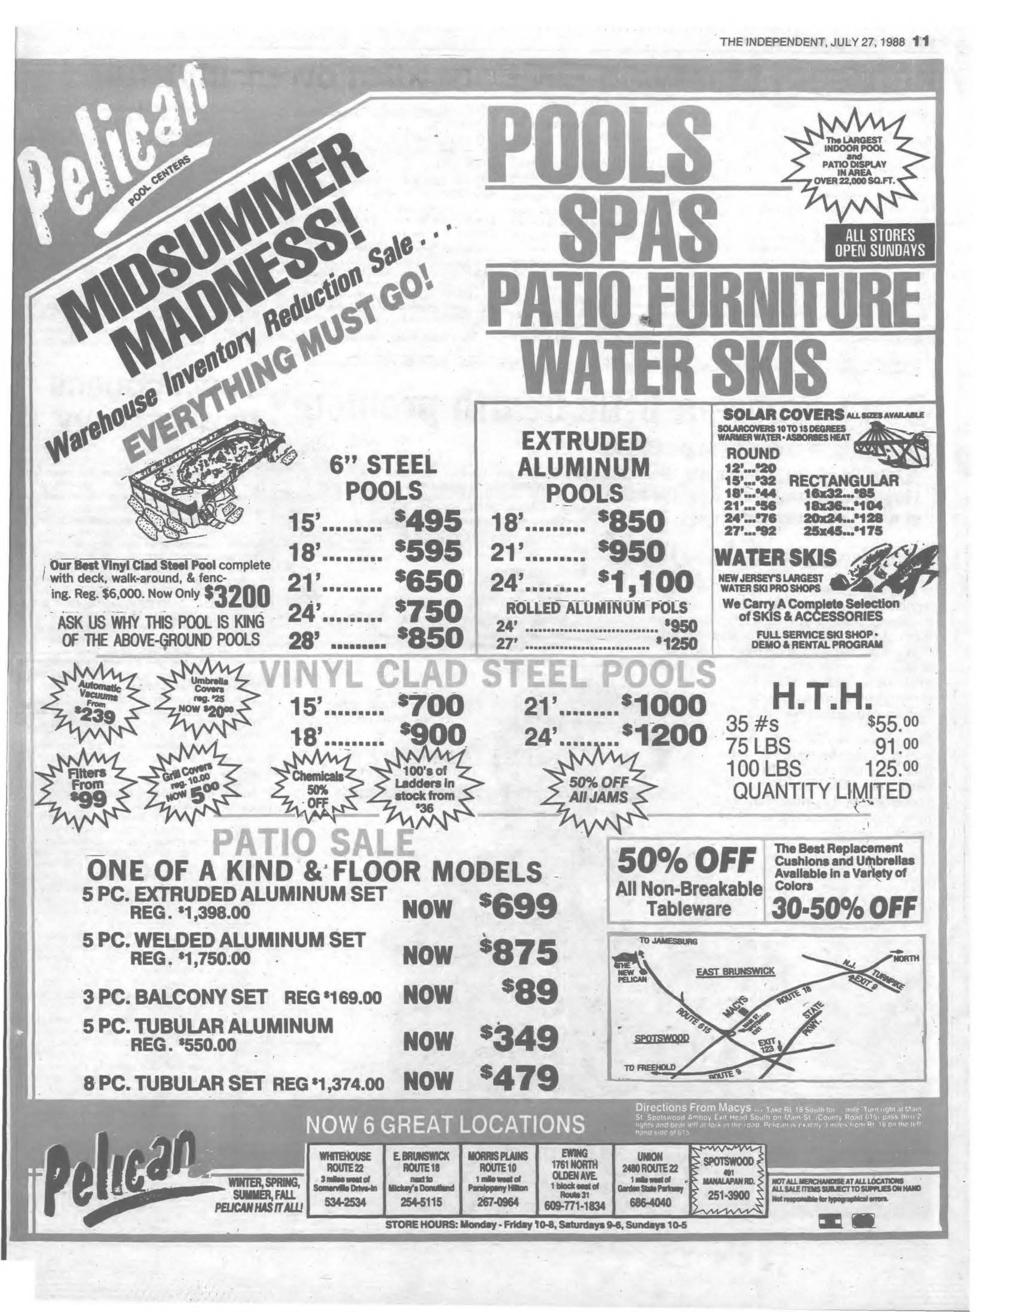 THE INDEPENDENT, JULY 27, 1988 1 1 POO LS SPAS p a t m h h w water sms ALL STORES OPEIMSUNDAYS i u r e h O ^ 5 ^ - < * 6 STEEL POOLS Our Best Vinyl Clad Steel Pool complete with deck, walk-around, &